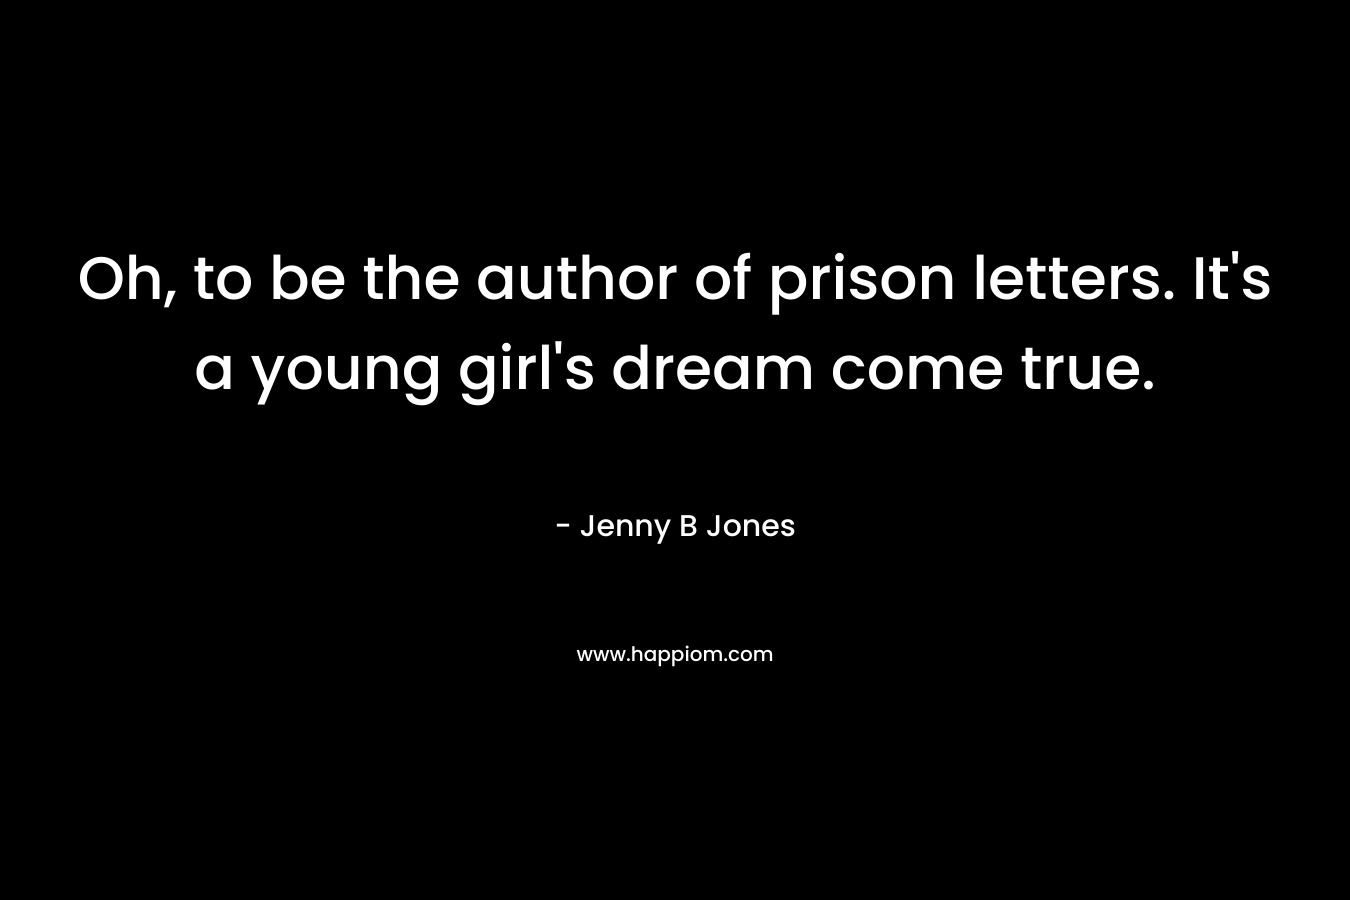 Oh, to be the author of prison letters. It's a young girl's dream come true.